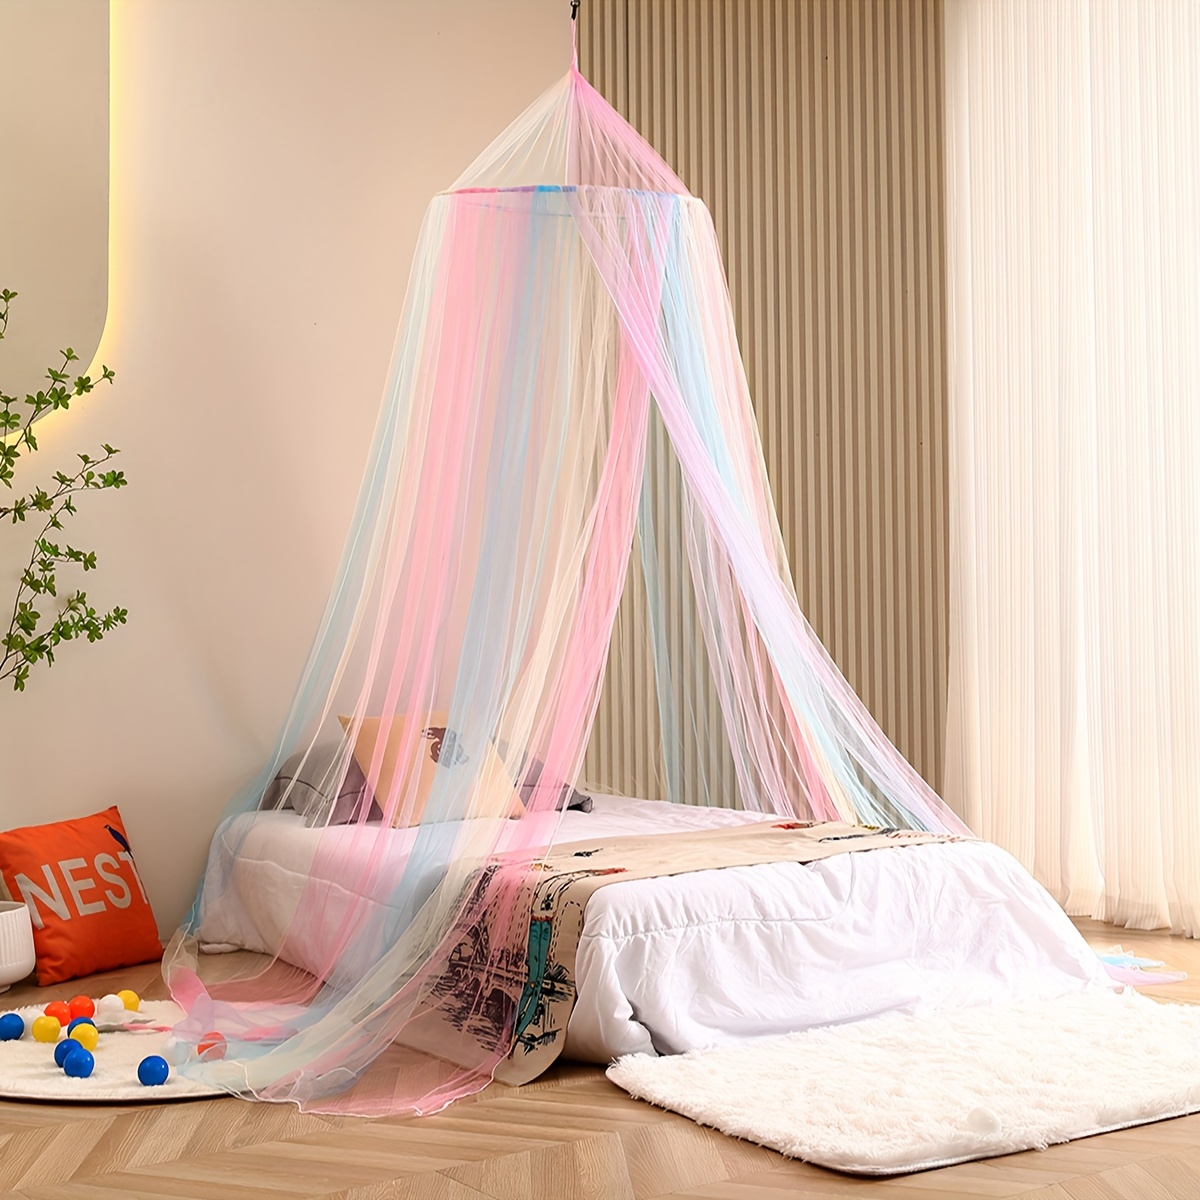 

1pc Bed Canopy Encrypted Dome Mosquito Net, Dream Rainbow Bed Canopy | Stars Bed Canopy Glow In The Dark, Suite For 1.5-1.8m King Beds, Easy To Store And Anti-mosquito Well